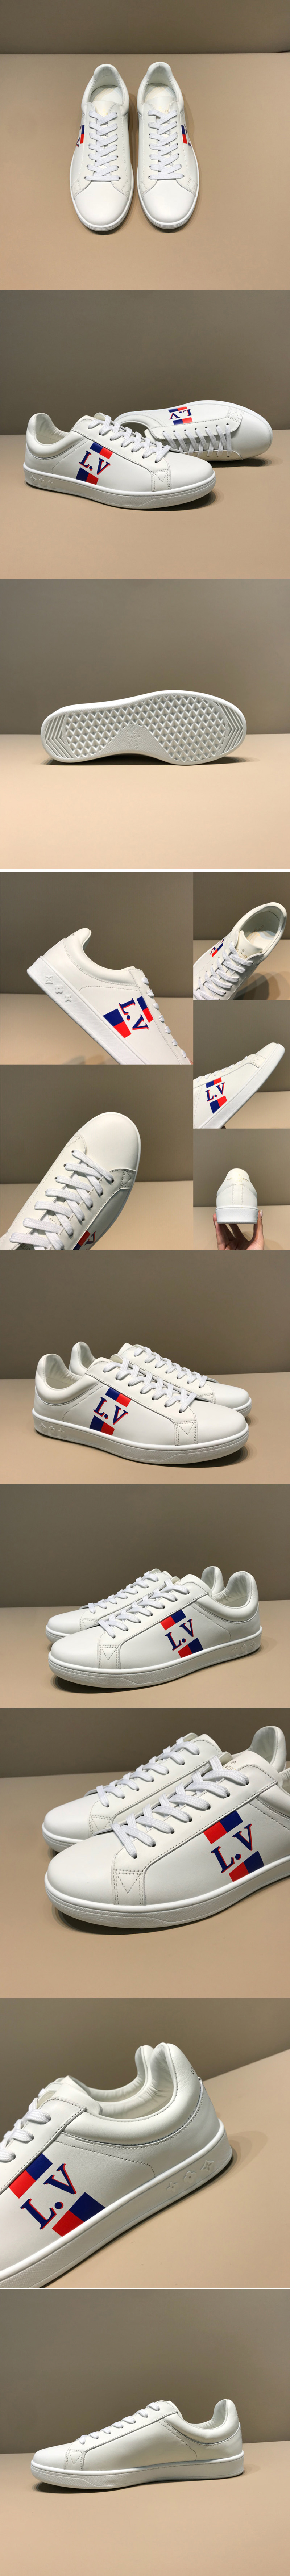 Replica Louis Vuitton 1A57U5 LV Luxembourg Sneaker in White Calf leather With Red web